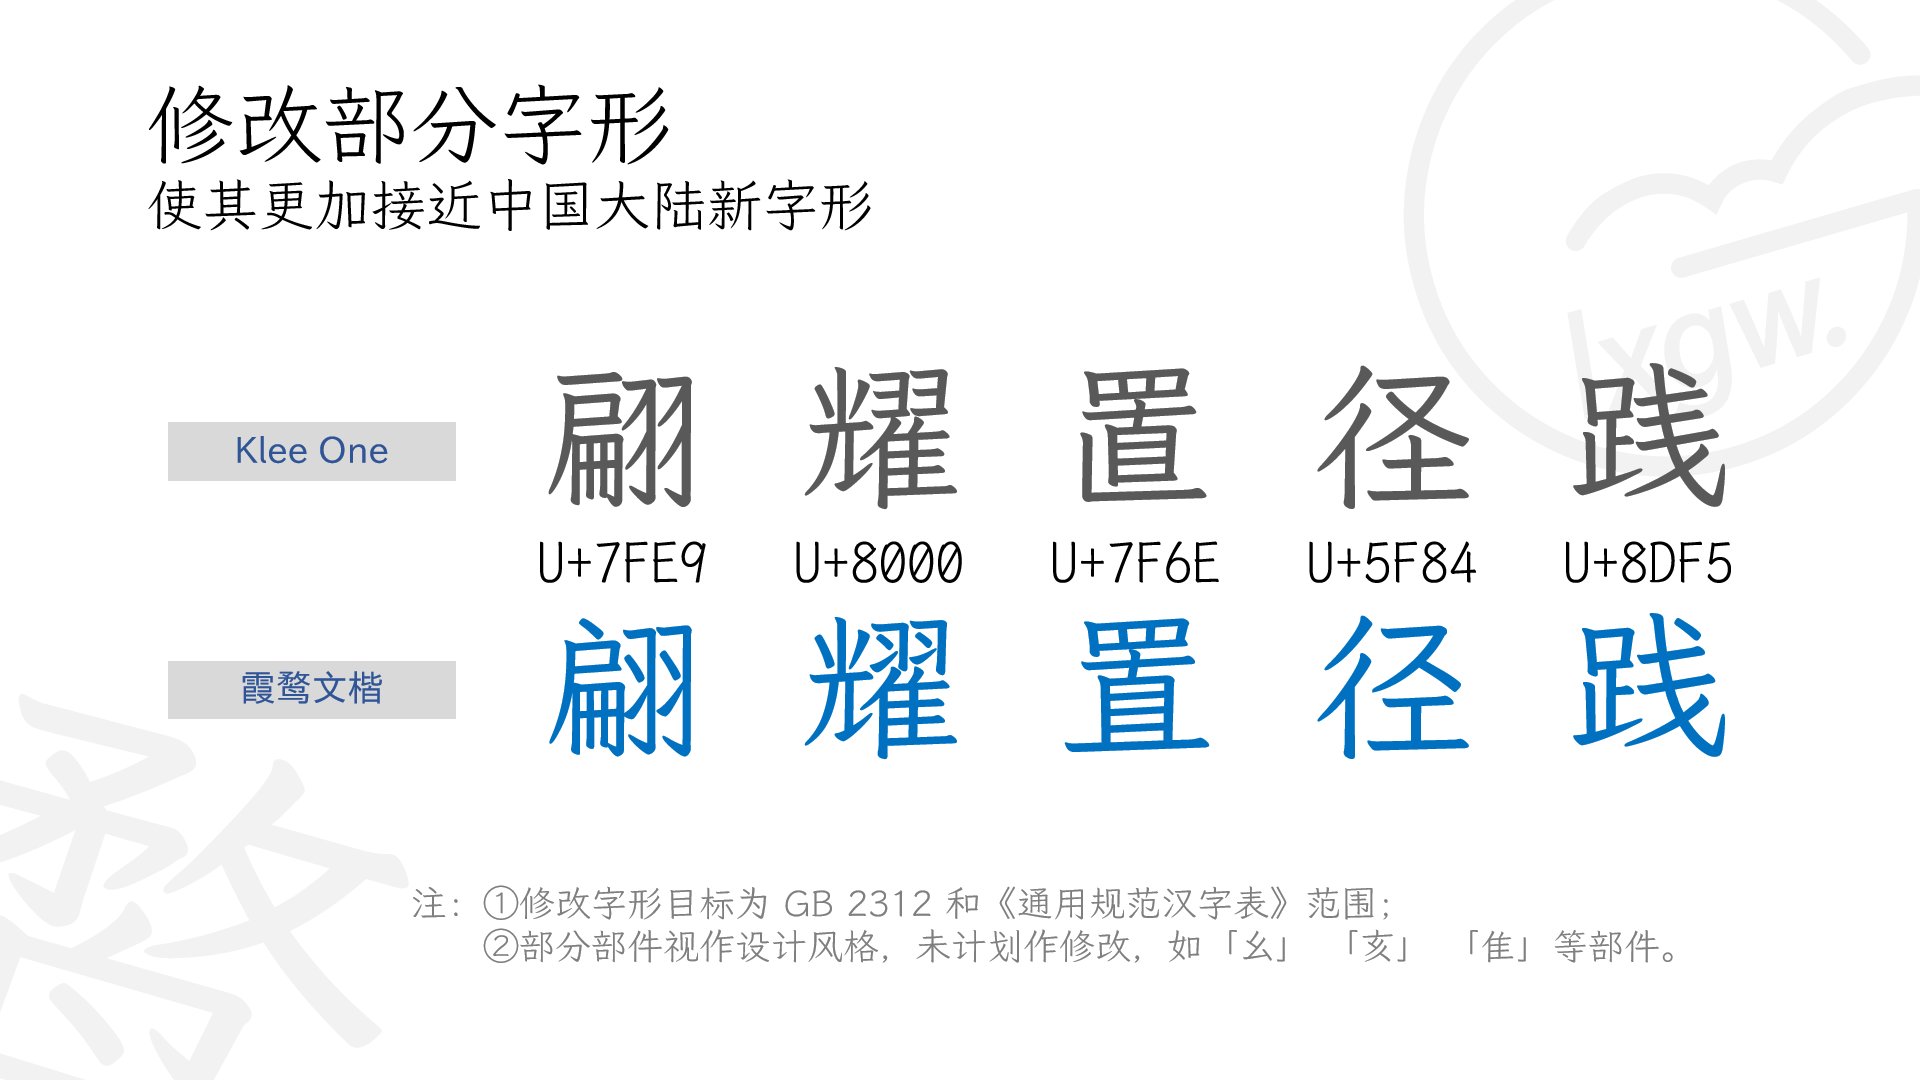 GitHub - lxgw/LxgwWenKai: An open-source Chinese font derived from 